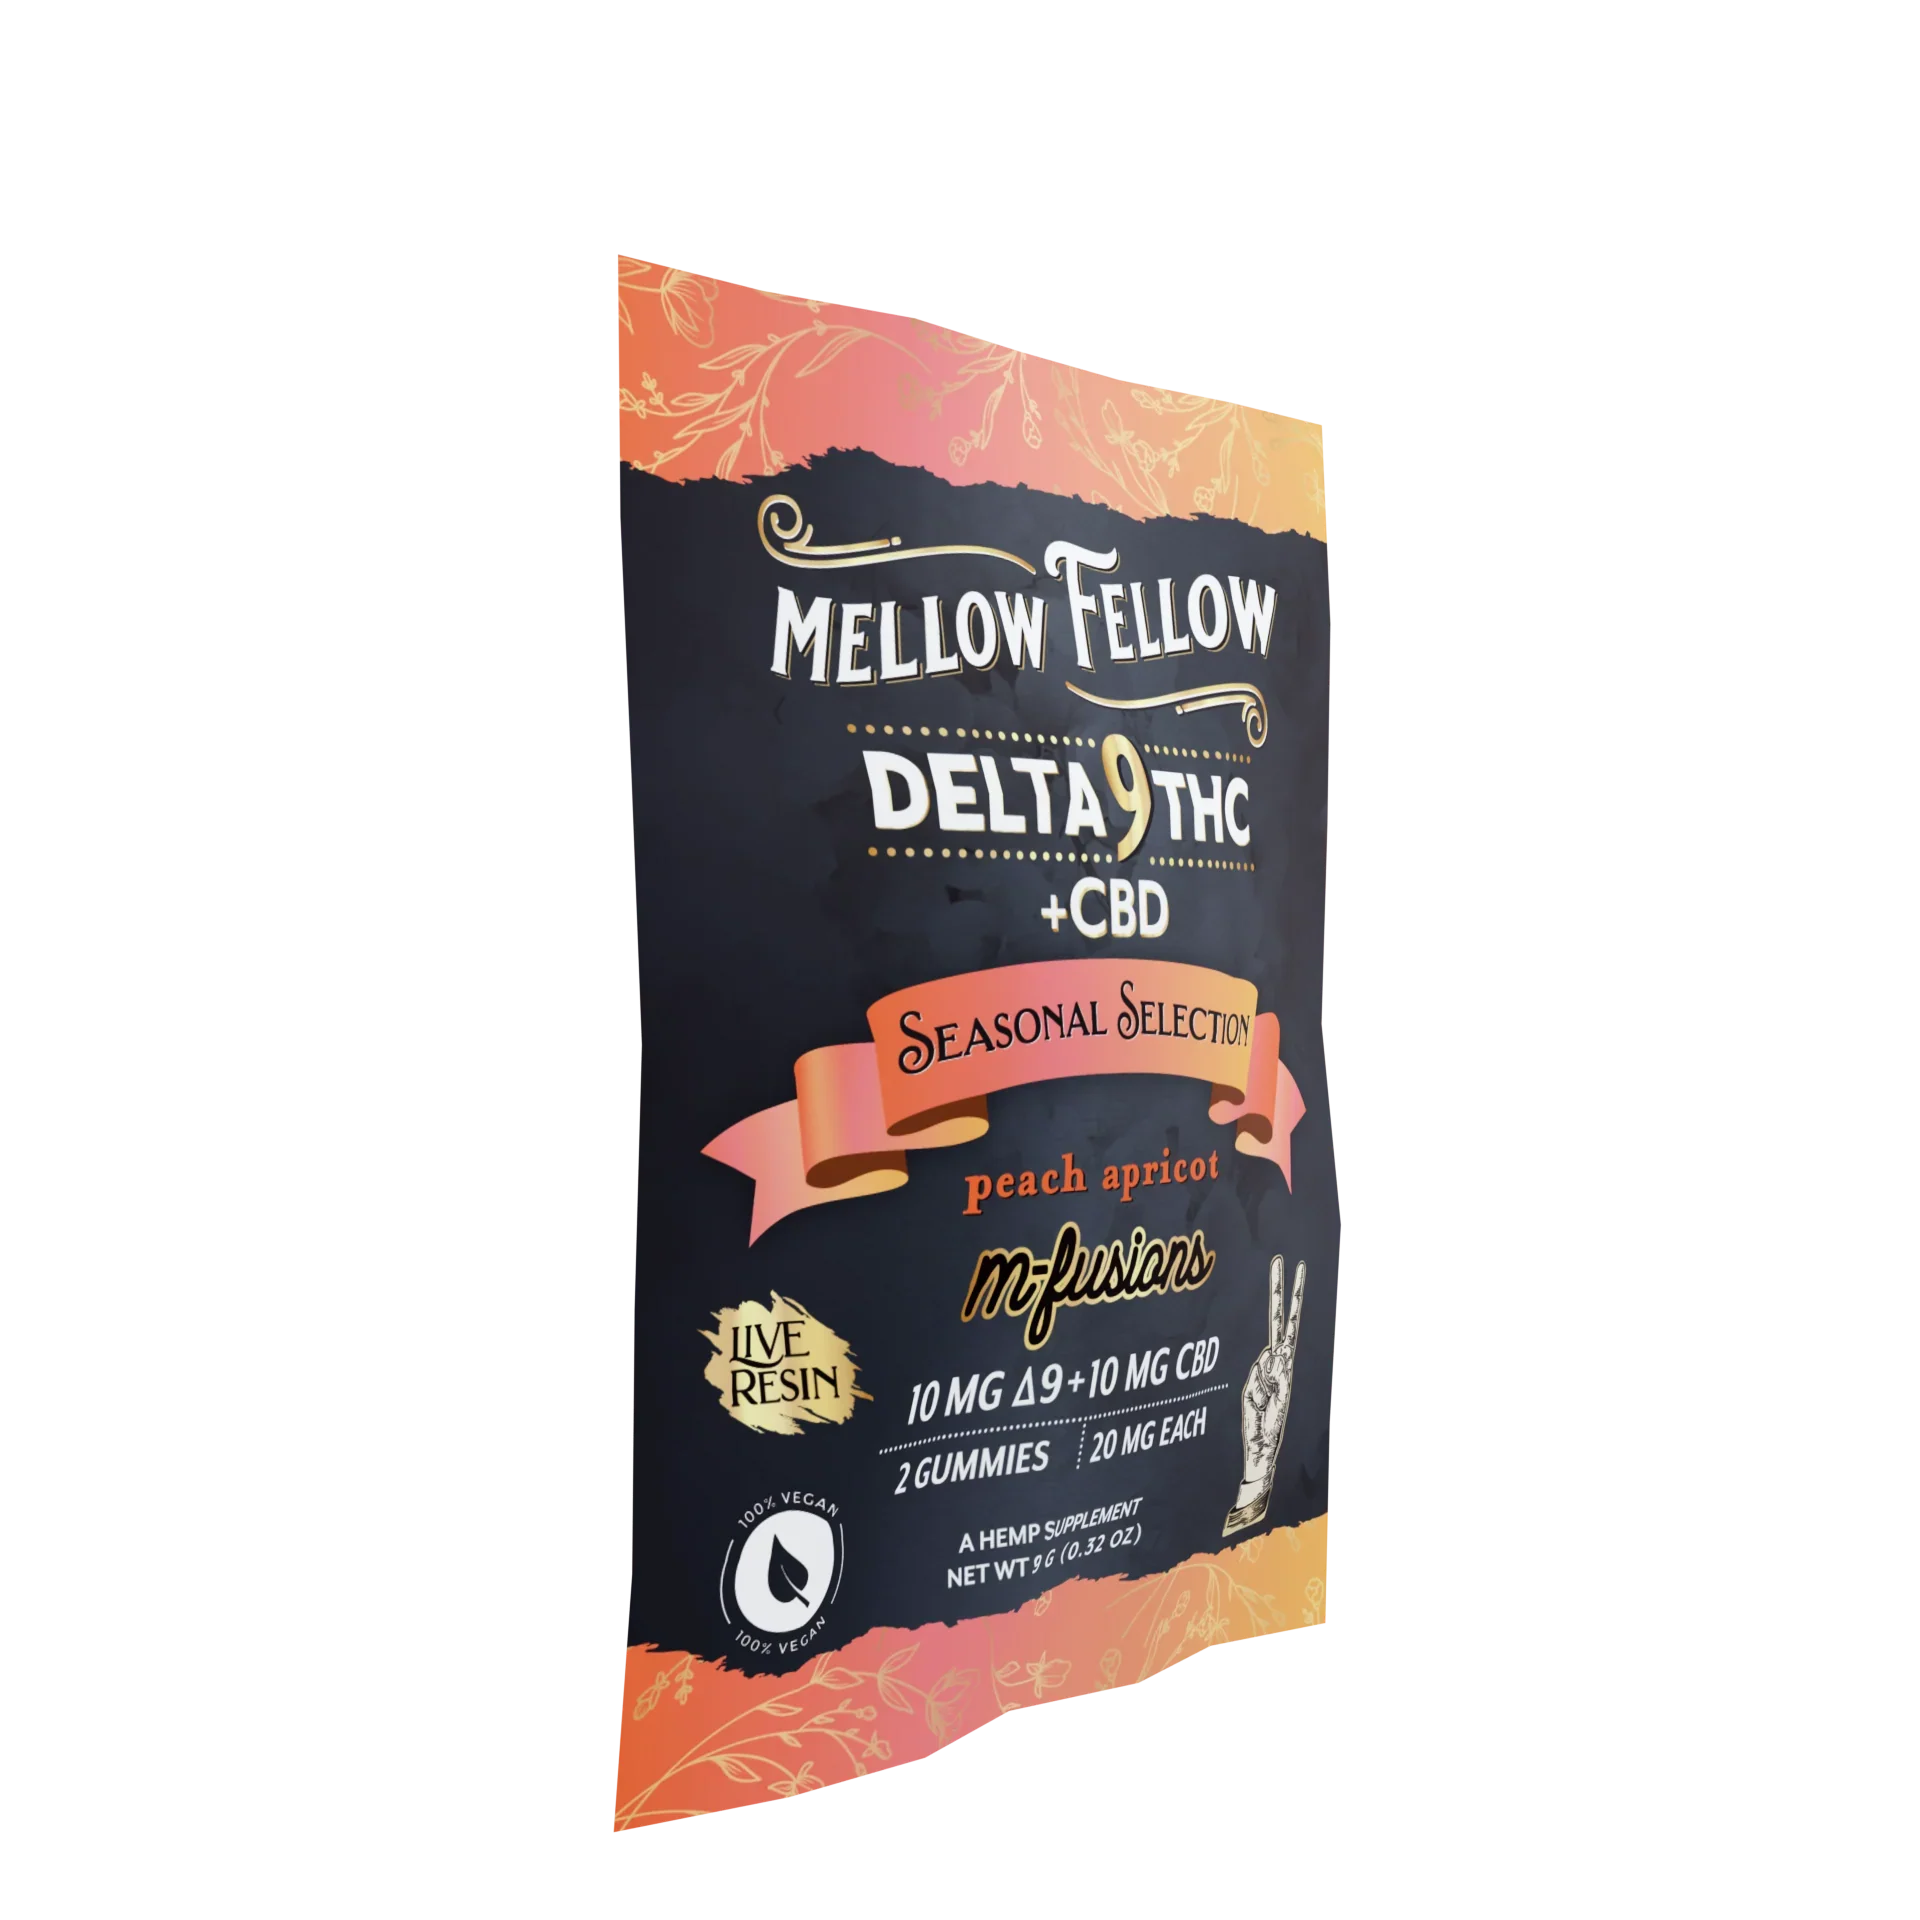 Mellow Fellow Live Resin Infused Edibles - 2cnt 40mg Delta 9 THC & CBD - Peach Apricot (Seasonal Selection) Best Price